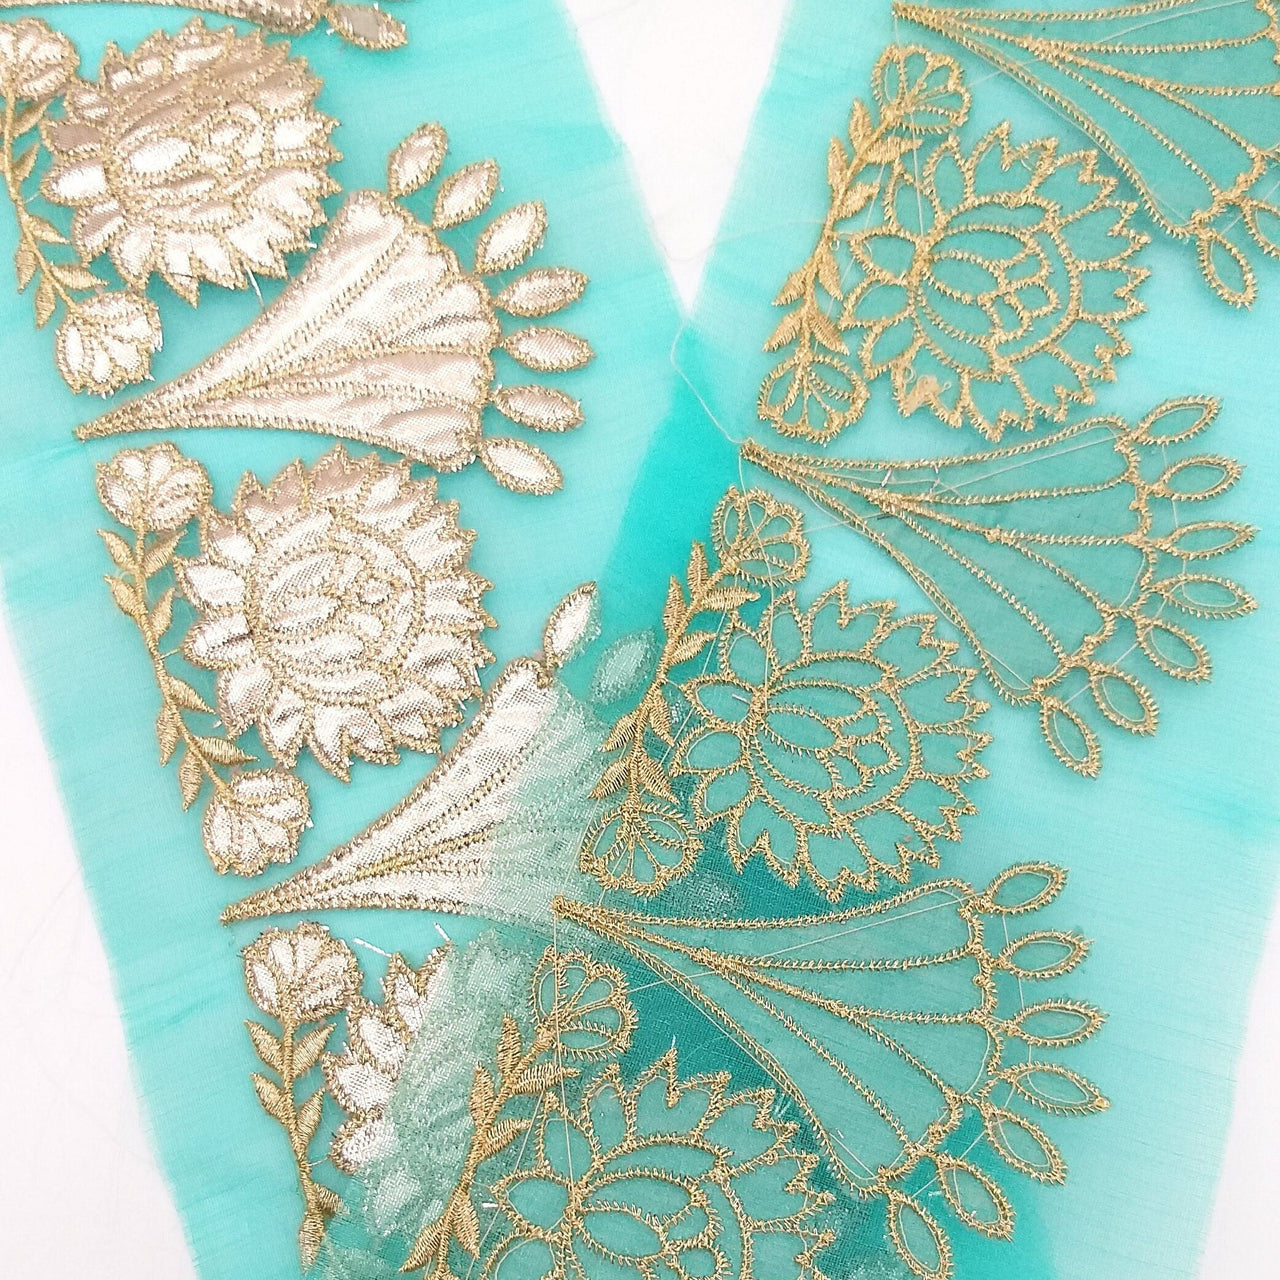 Blue Tissue Fabric Lace Trim with Gota Patti Embroidery, Foiled Embroidery in Silver, Sari Border Trim By Yard Decorative Trim Craft Lace